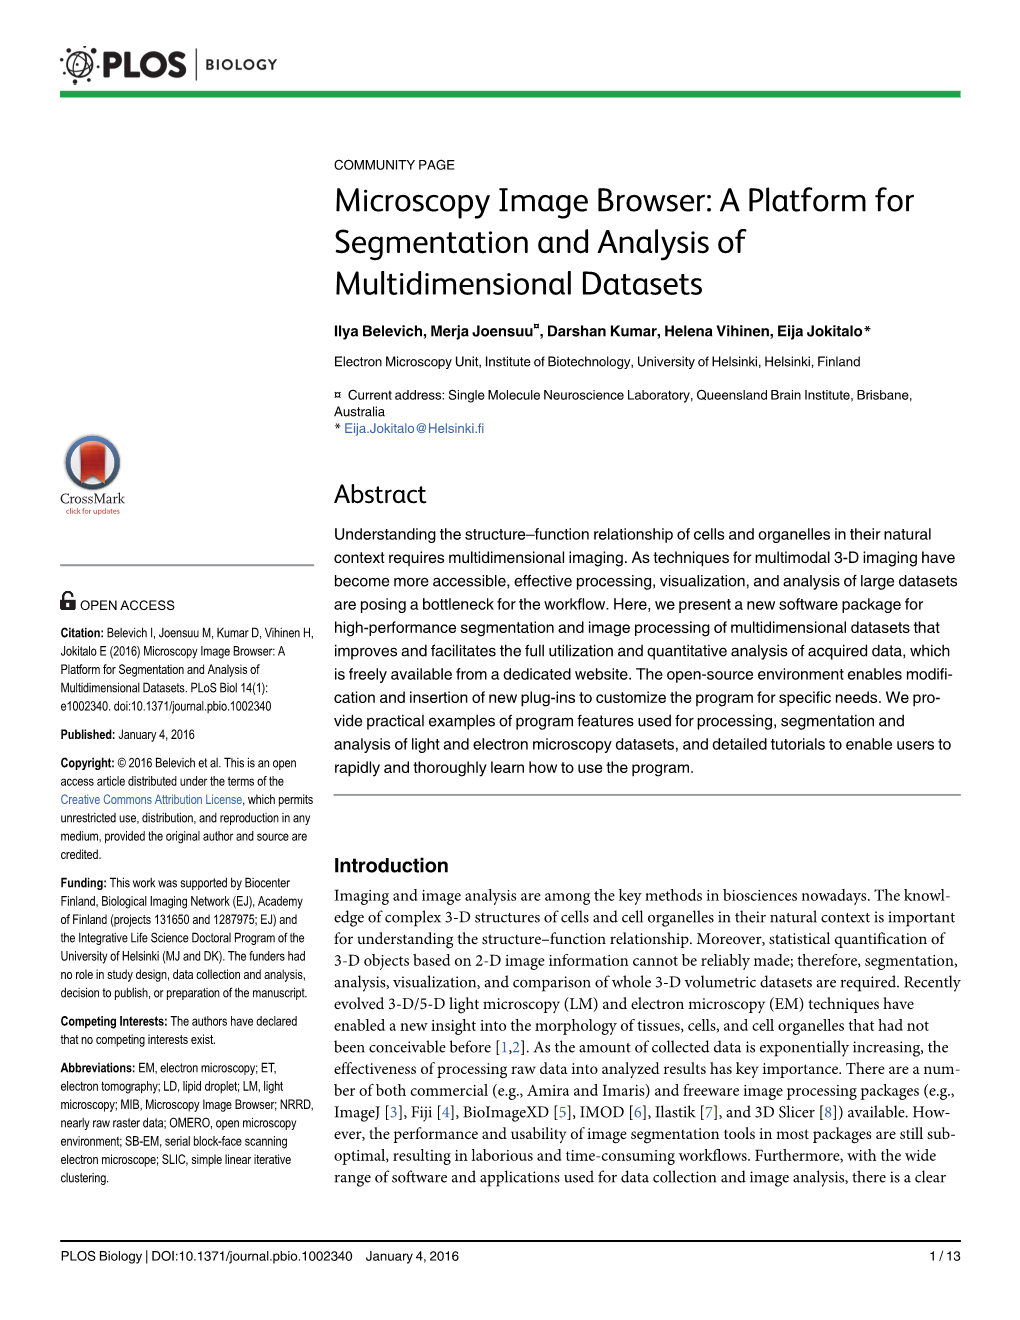 Microscopy Image Browser: a Platform for Segmentation and Analysis of Multidimensional Datasets